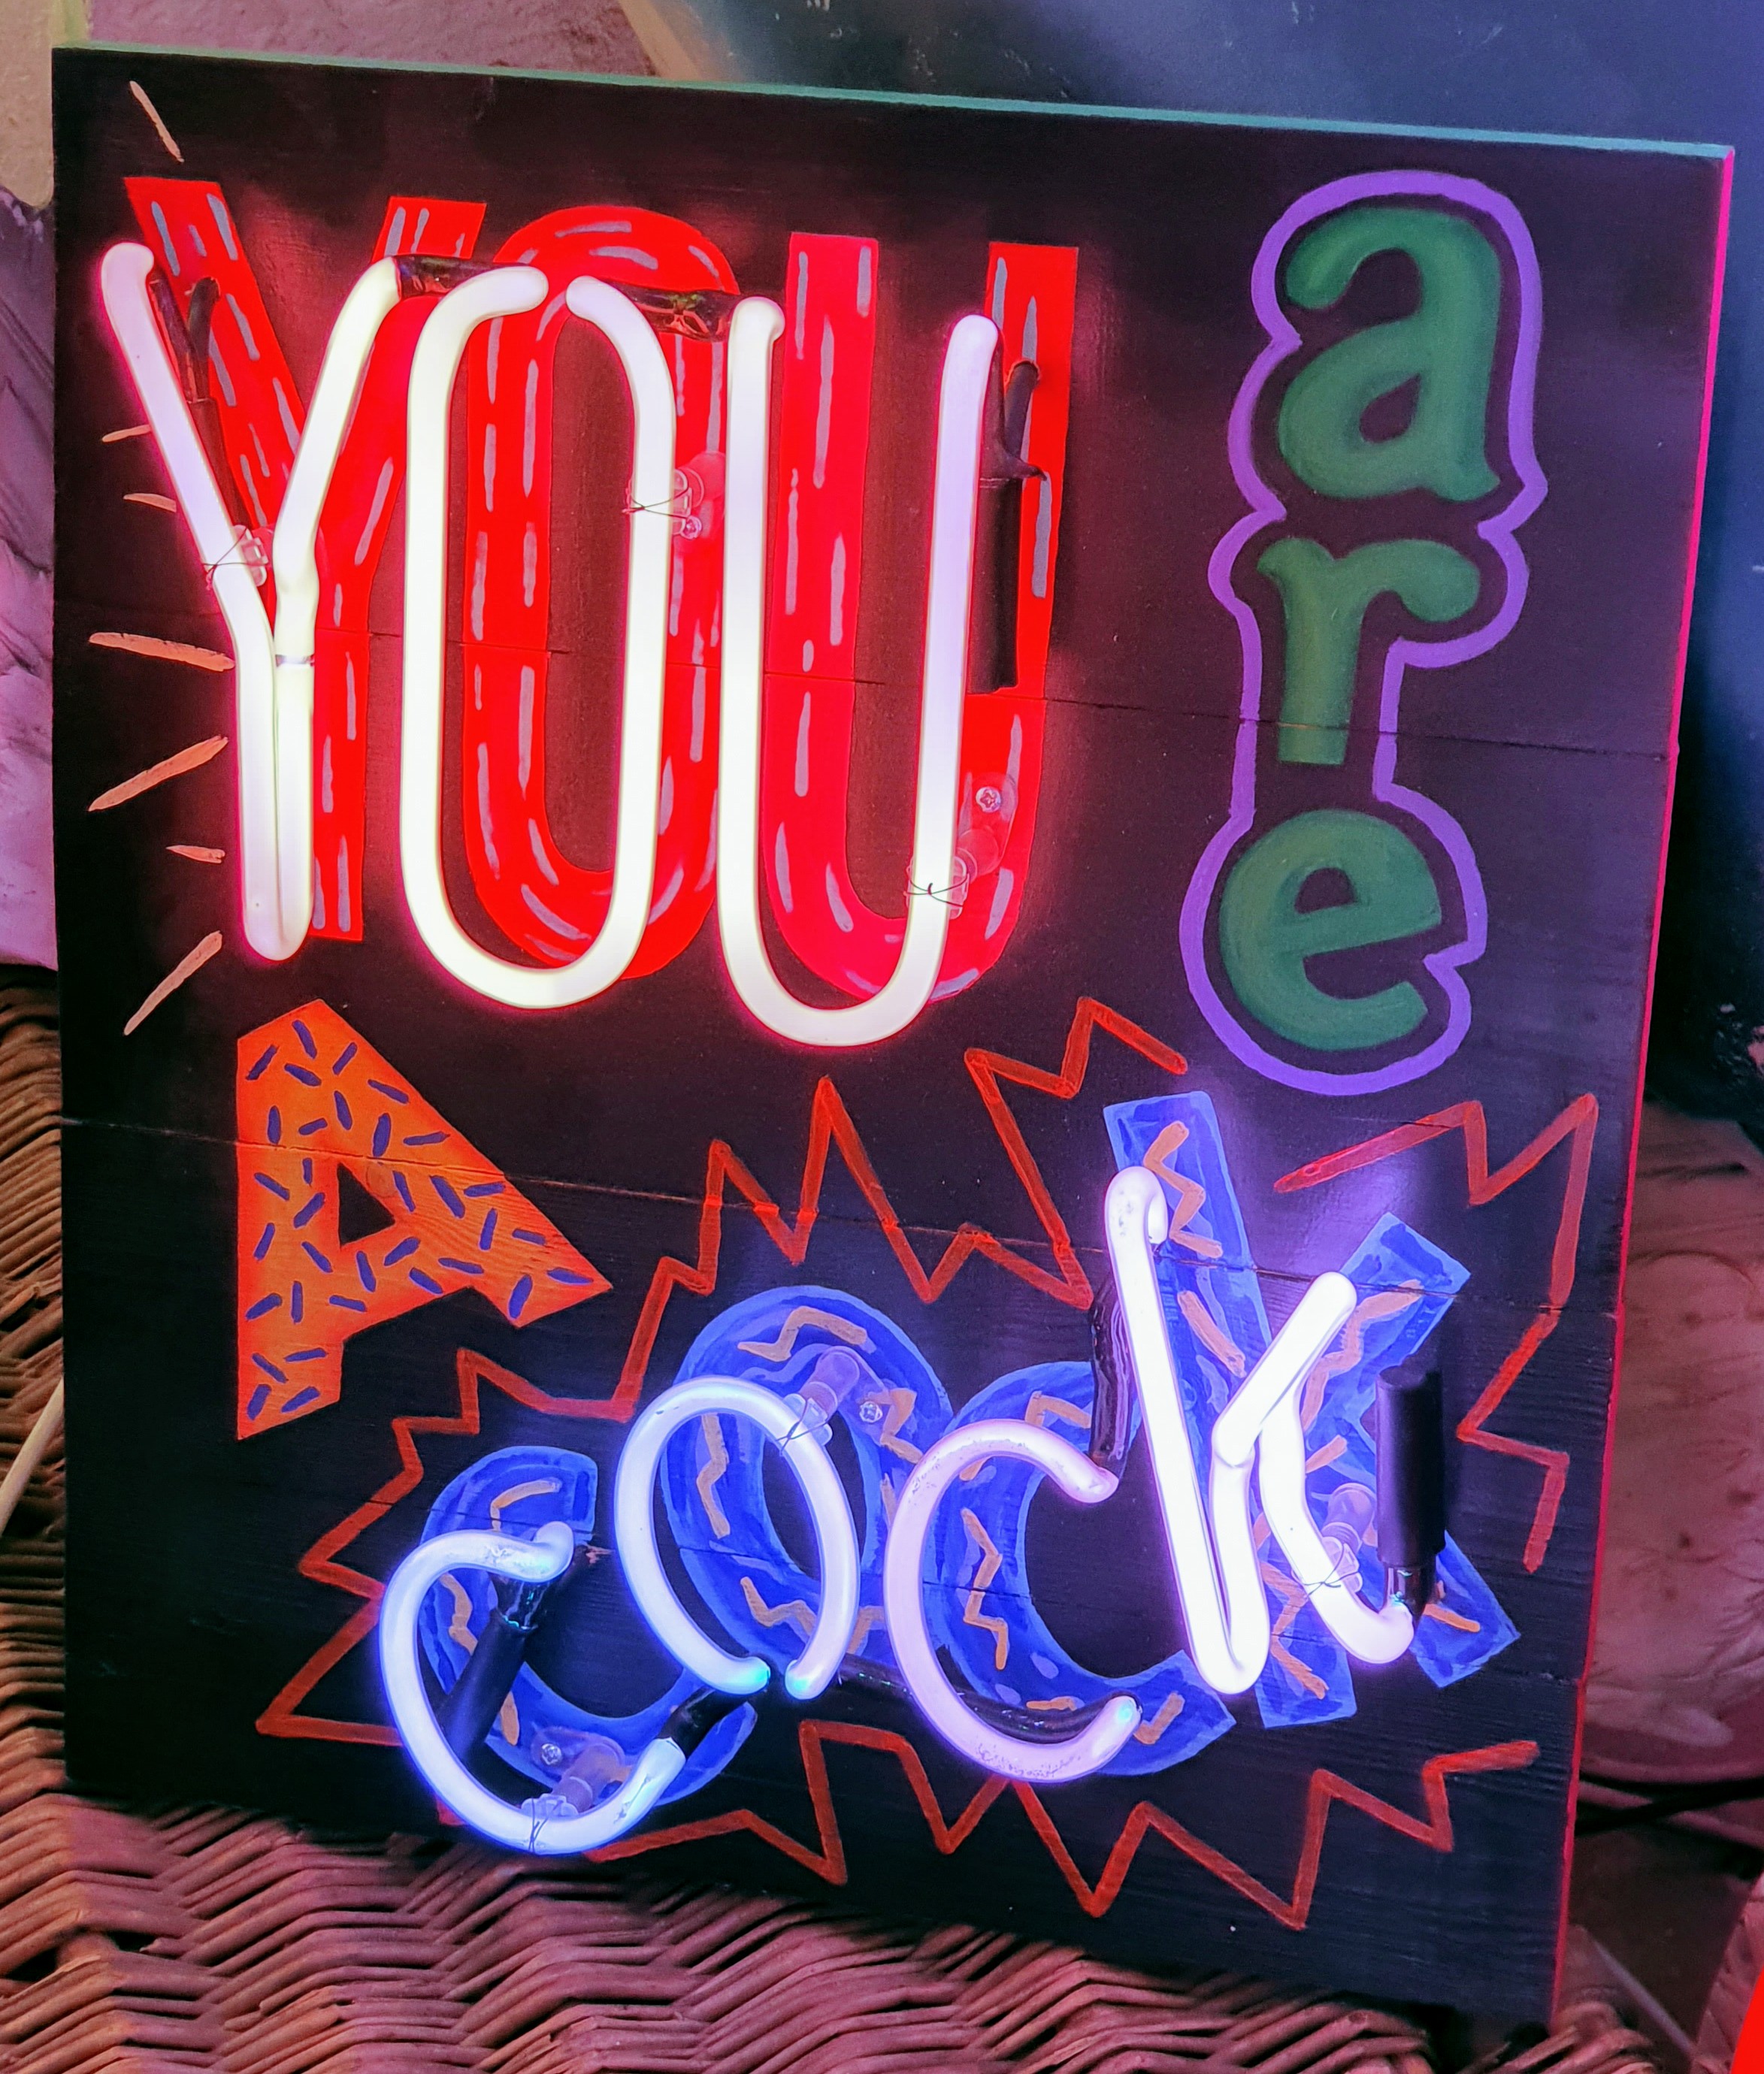 Neon lights and signs at God's Own Junkyard, Walthamstow, London